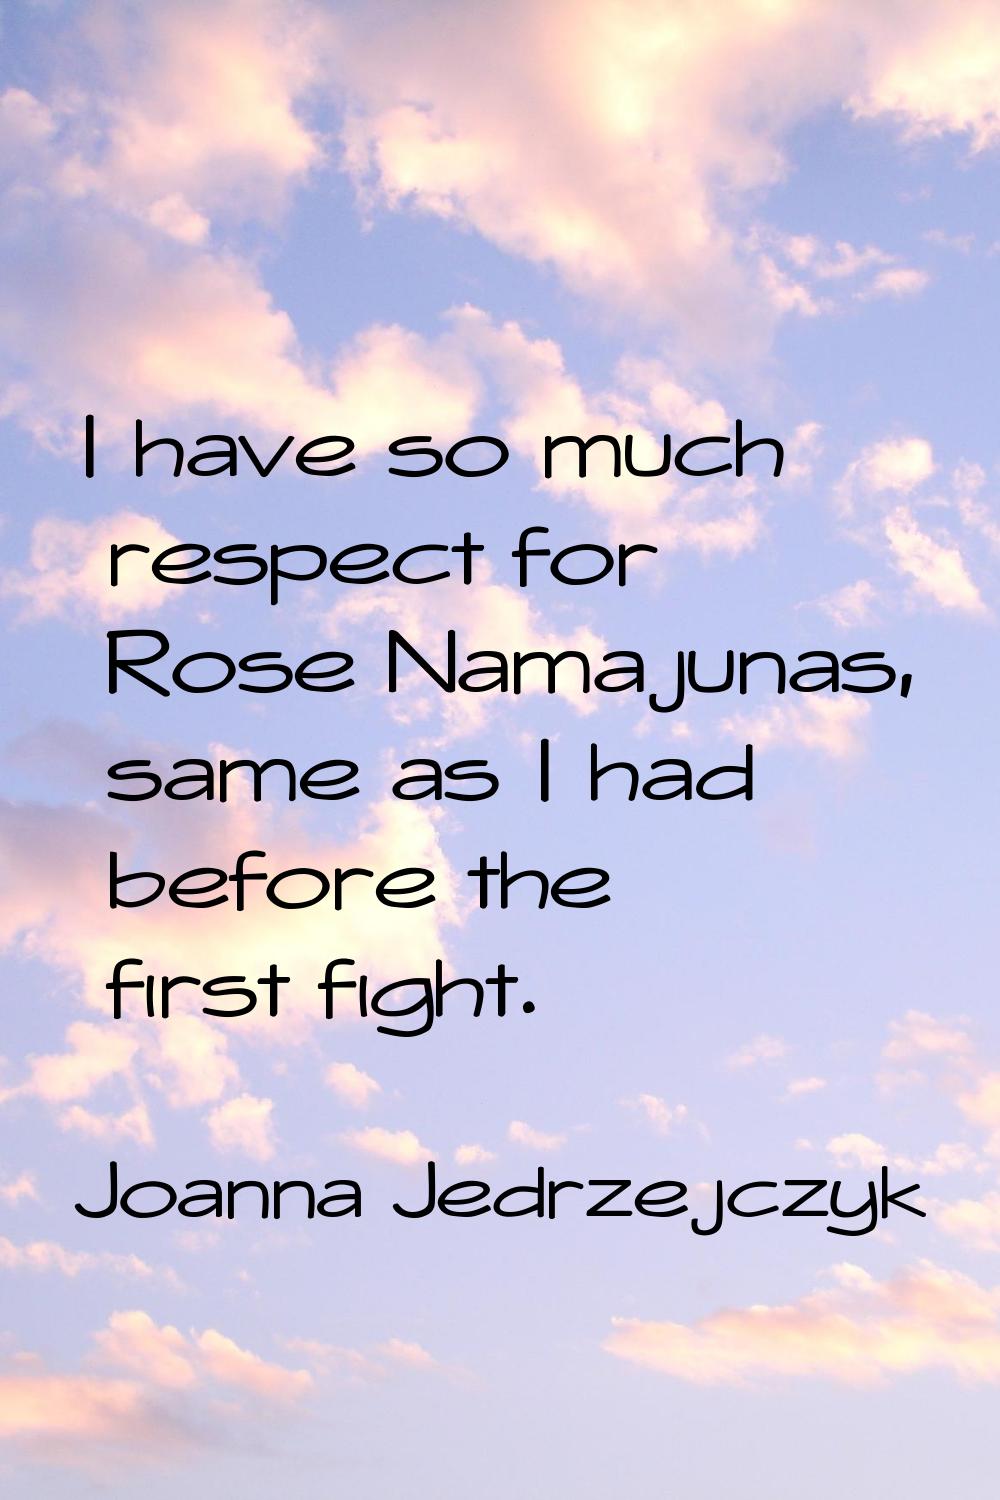 I have so much respect for Rose Namajunas, same as I had before the first fight.